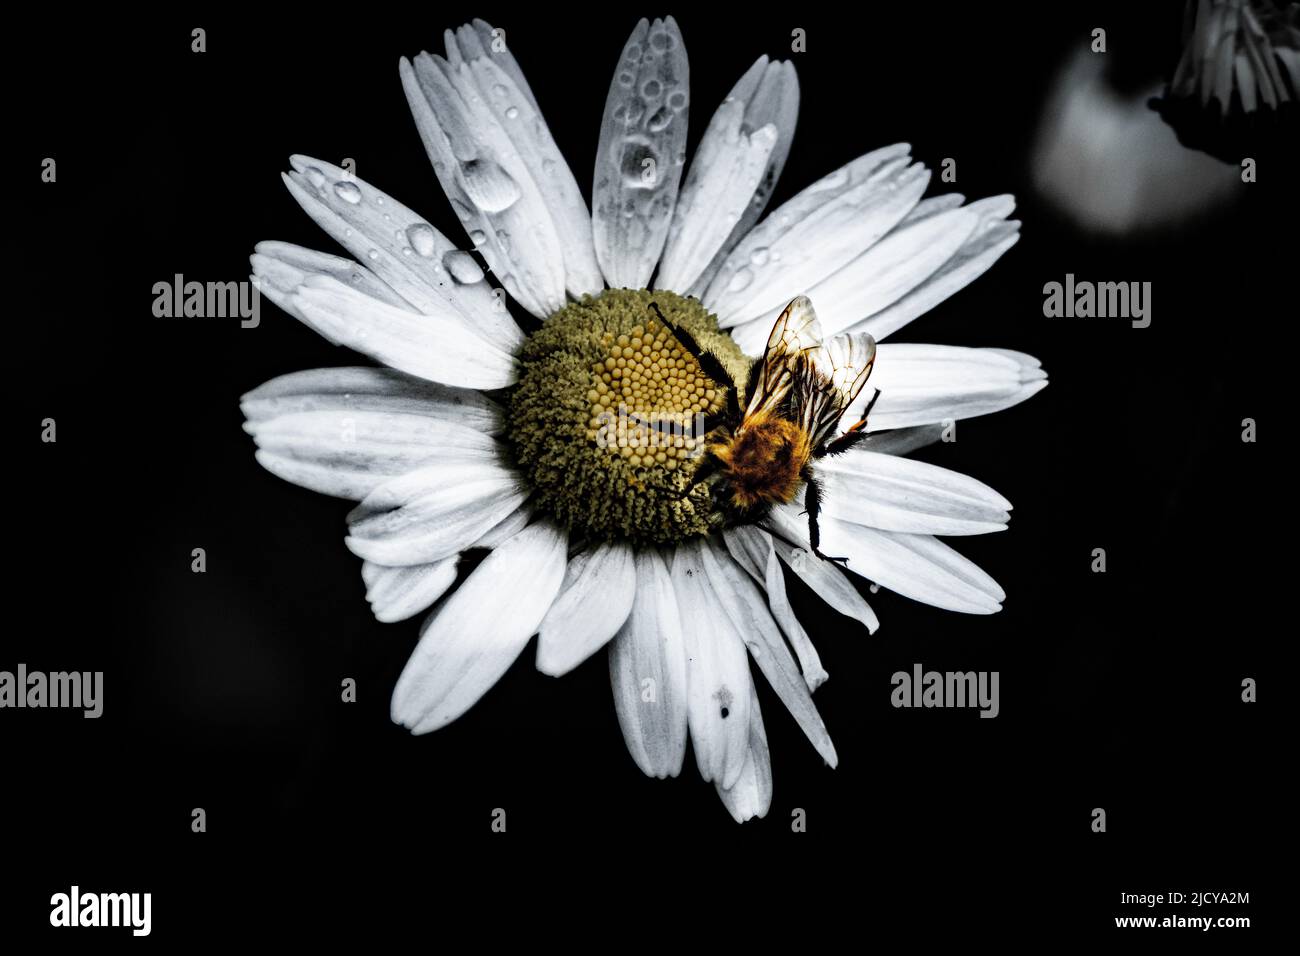 Bumblebee and water drops on daisy flower Stock Photo